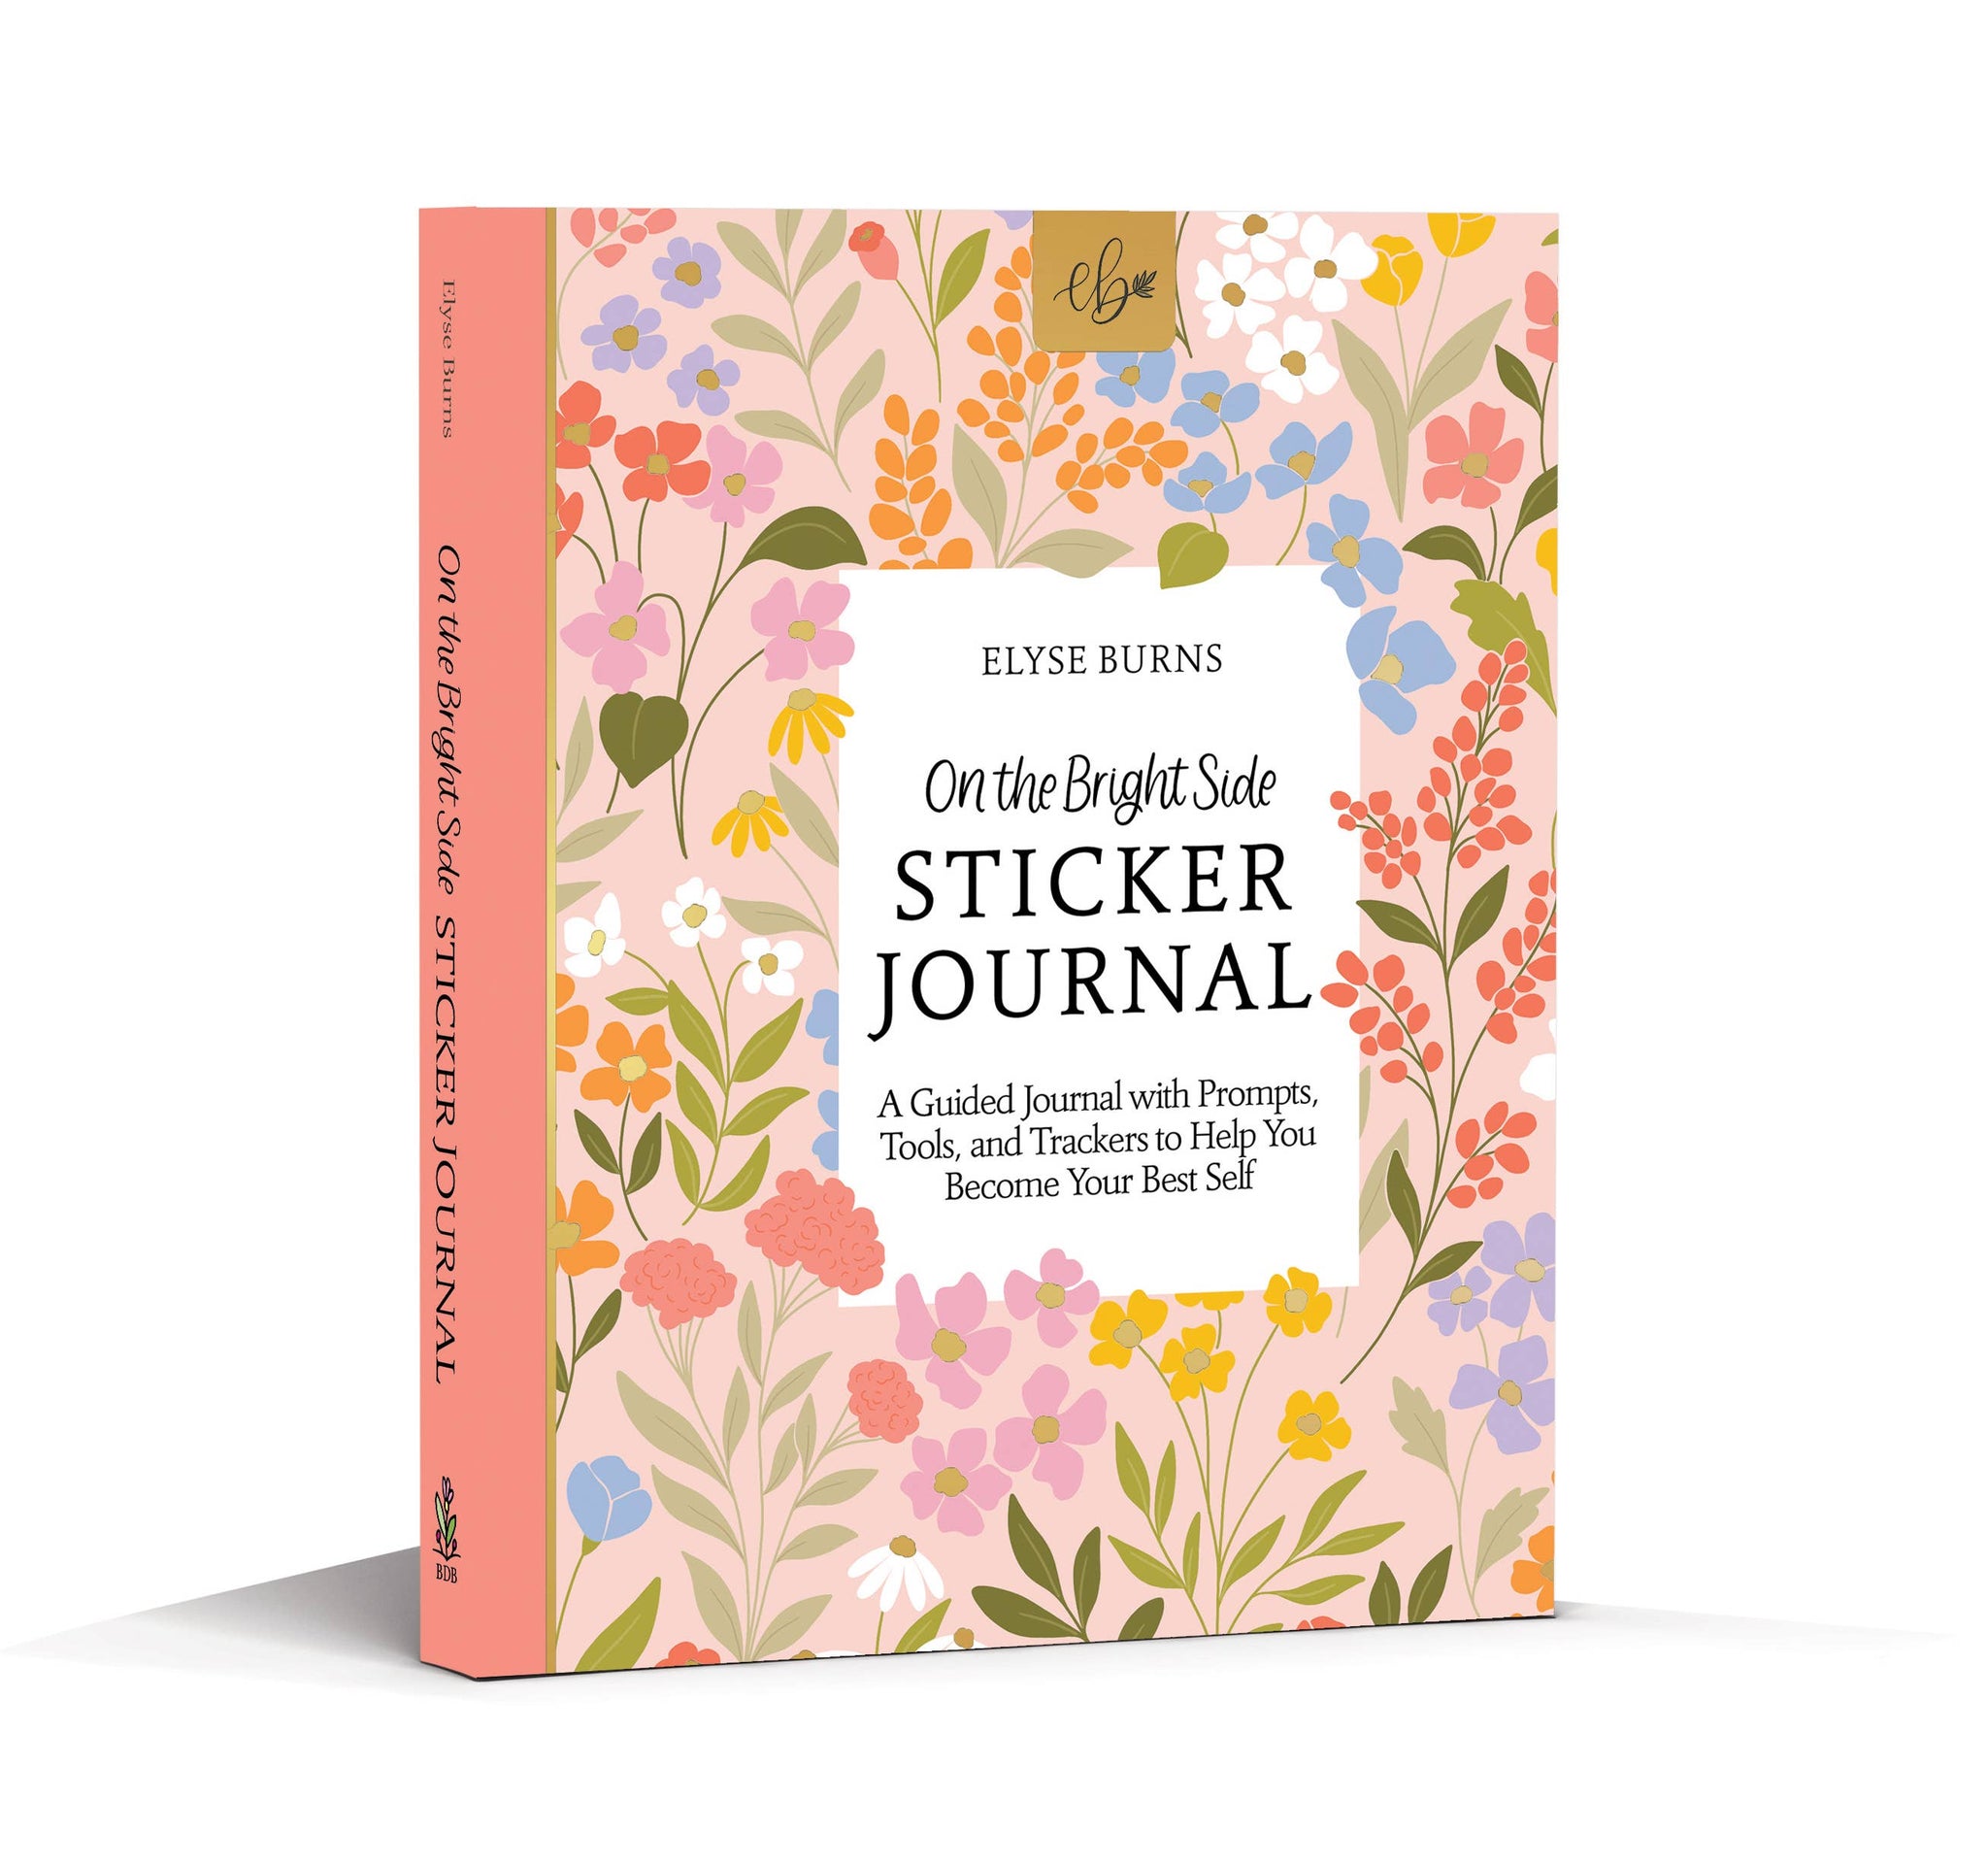 ON THE BRIGHT SIDE - STICKER JOURNAL